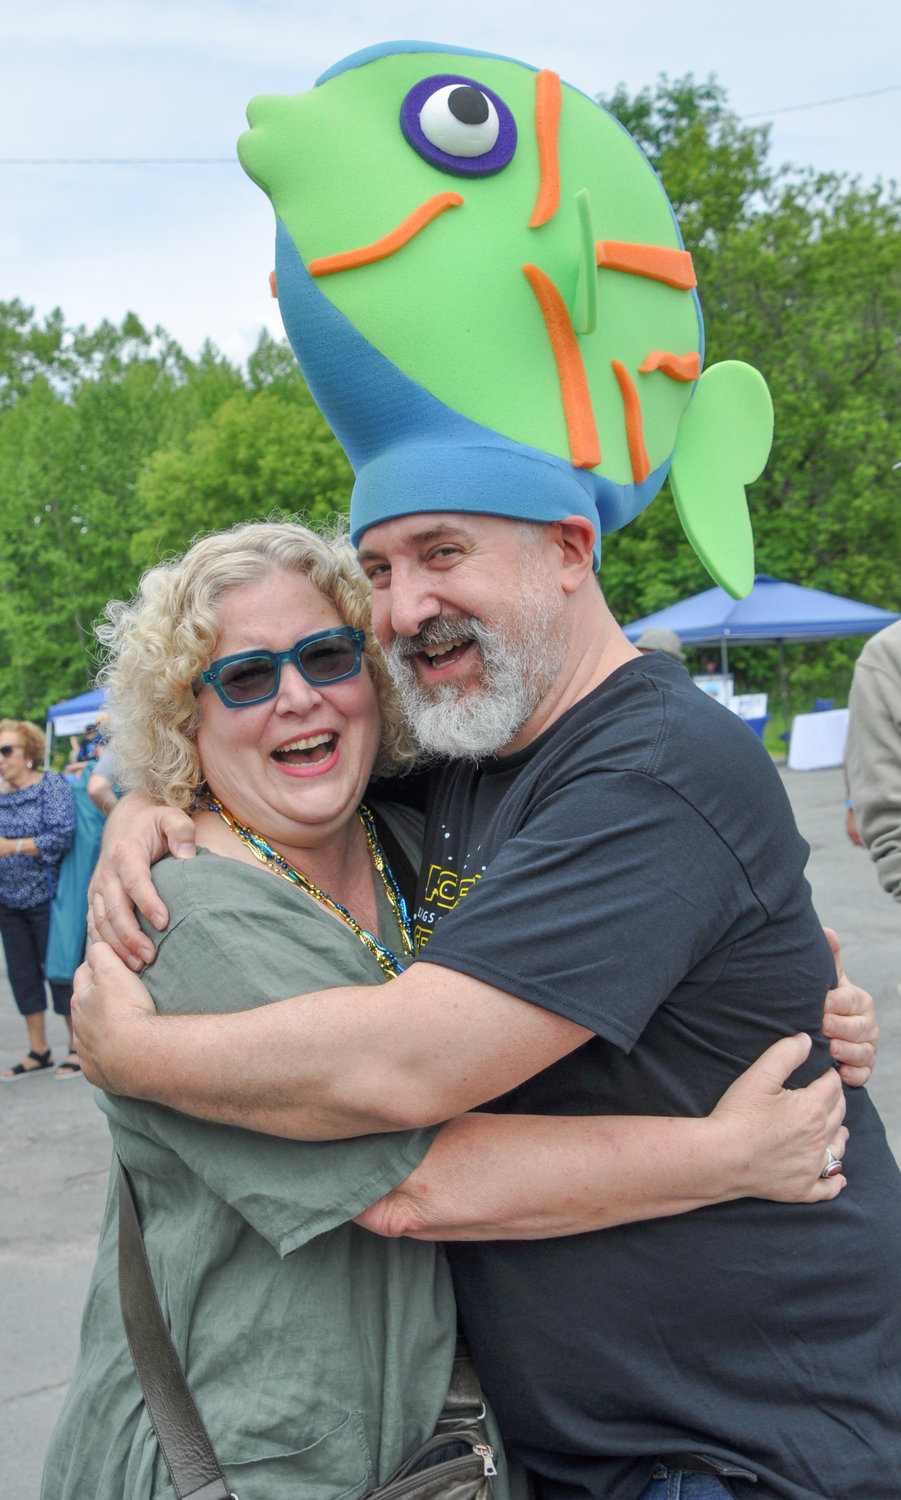 WJFF Radio's "Hostess with the Mostess" (Sabrina Artell from "Trailer Talk") and local author Wayne Hoffman ("The End of Her") were thrilled to run into each other at the Livingston Manor Trout Parade last weekend.